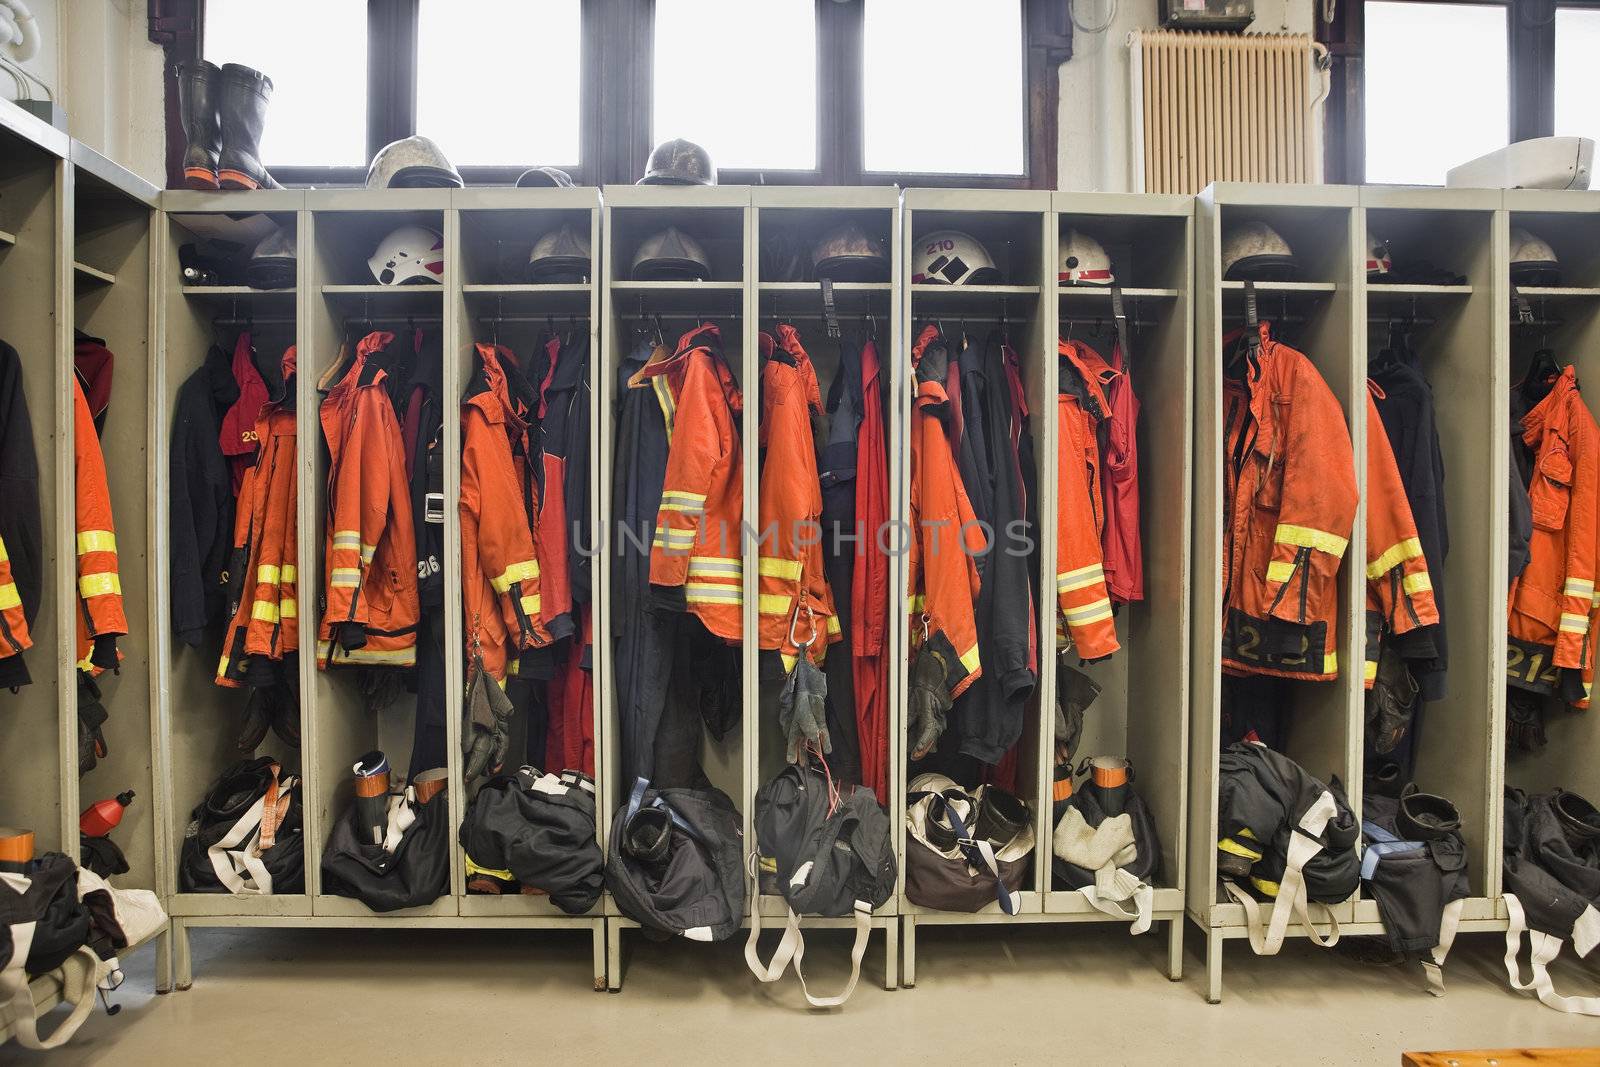 Firefighter suits by gemenacom